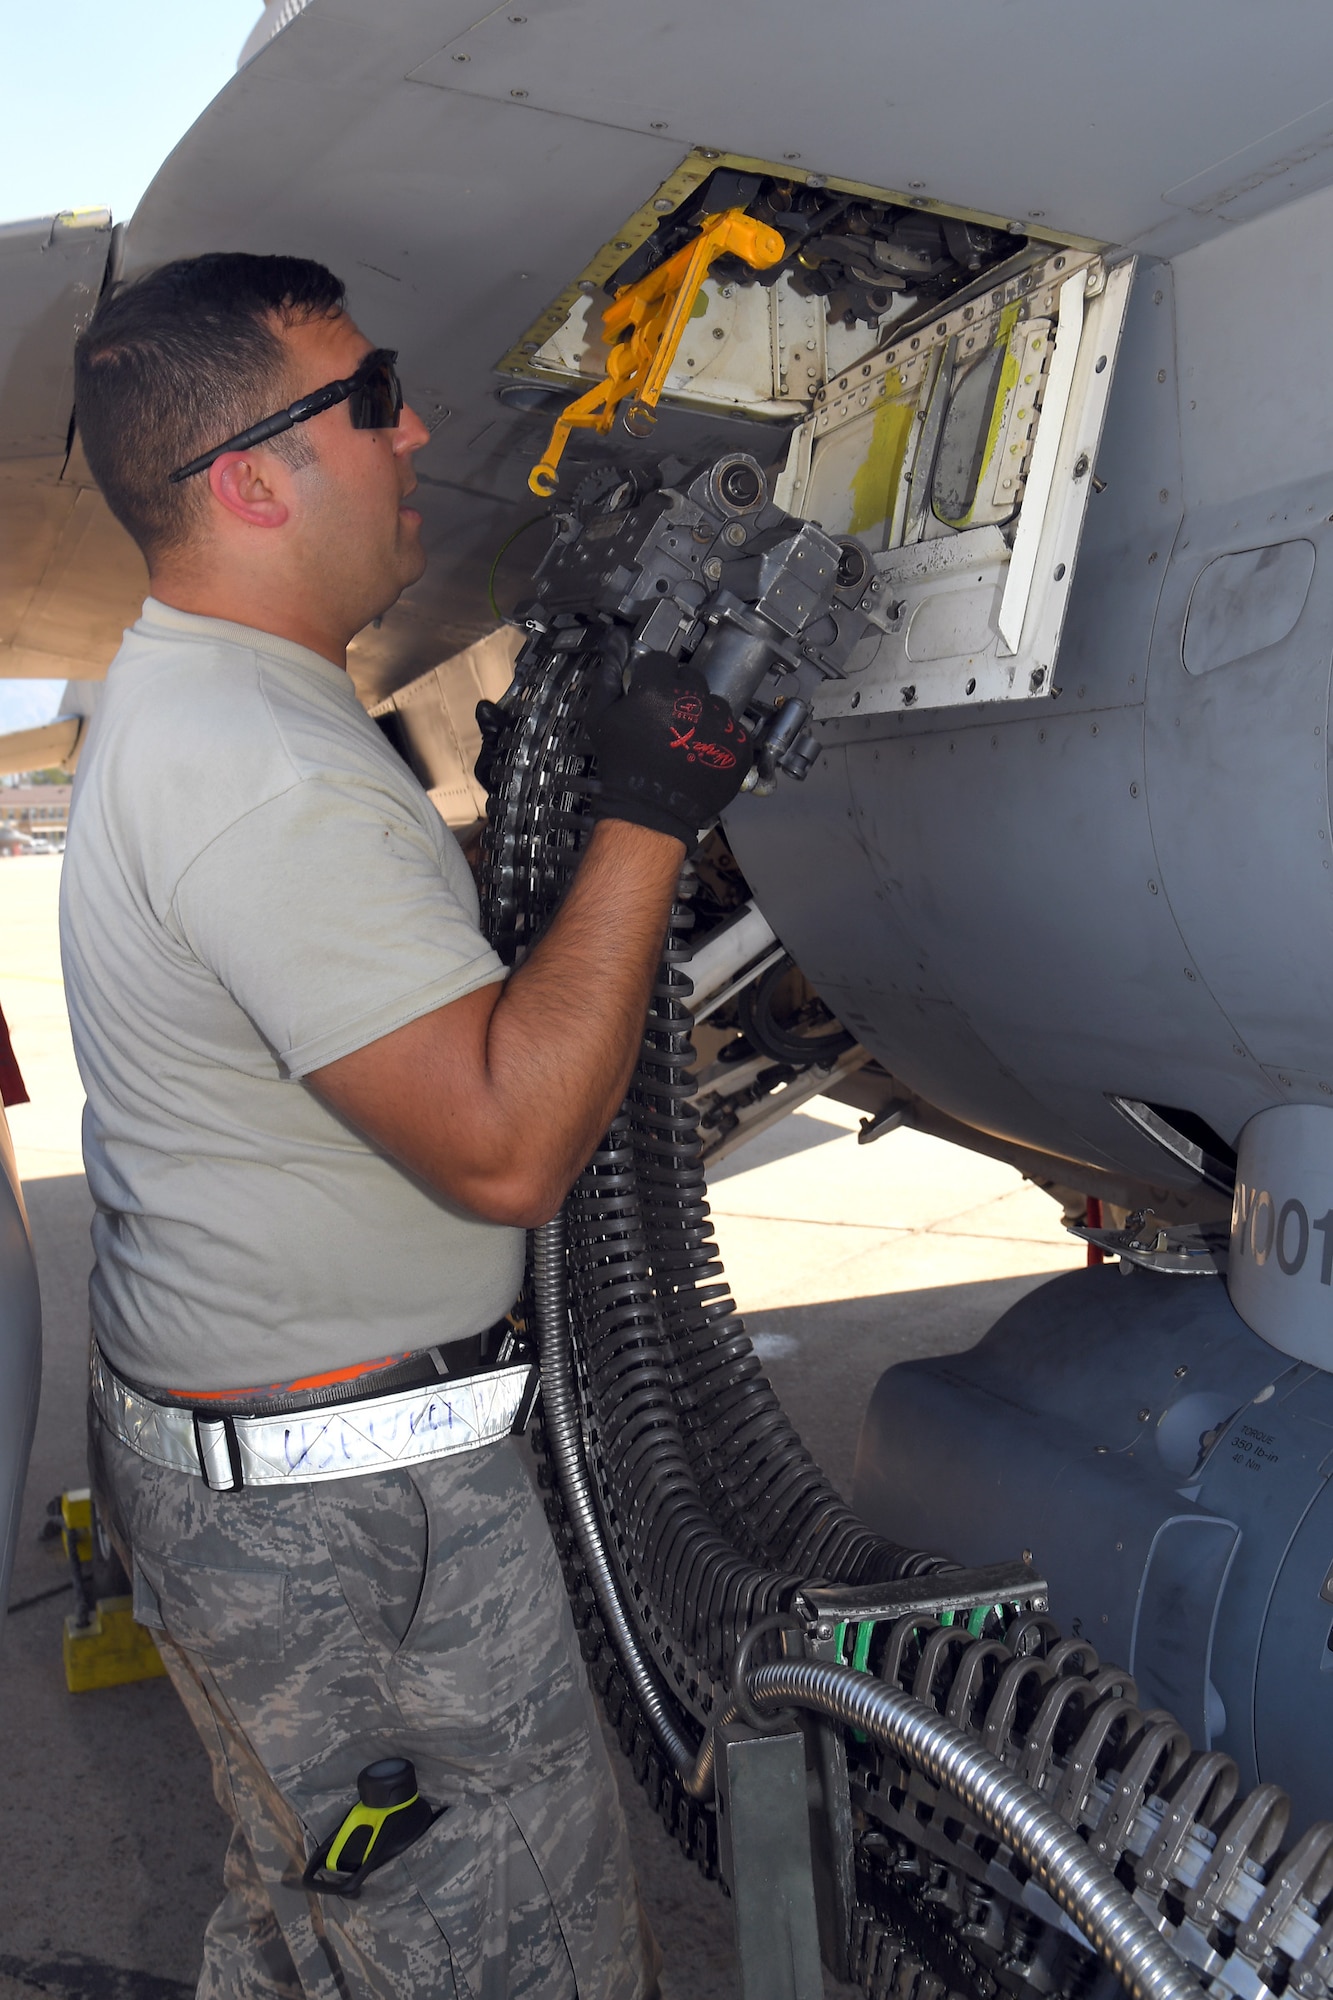 Staff Sgt. Richard Montalvan, 482nd Aircraft Maintenance Squadron, loads target rounds on an F-16, Aug. 8, 2018, at Hill Air Force Base, Utah. The 482nd AMXS from Homestead Air Reserve Base, Fla., was at Hill AFB to participate in the Air Force’s Weapon System Evaluation Program known as Combat Hammer. (U.S. Air Force photo by Todd Cromar)